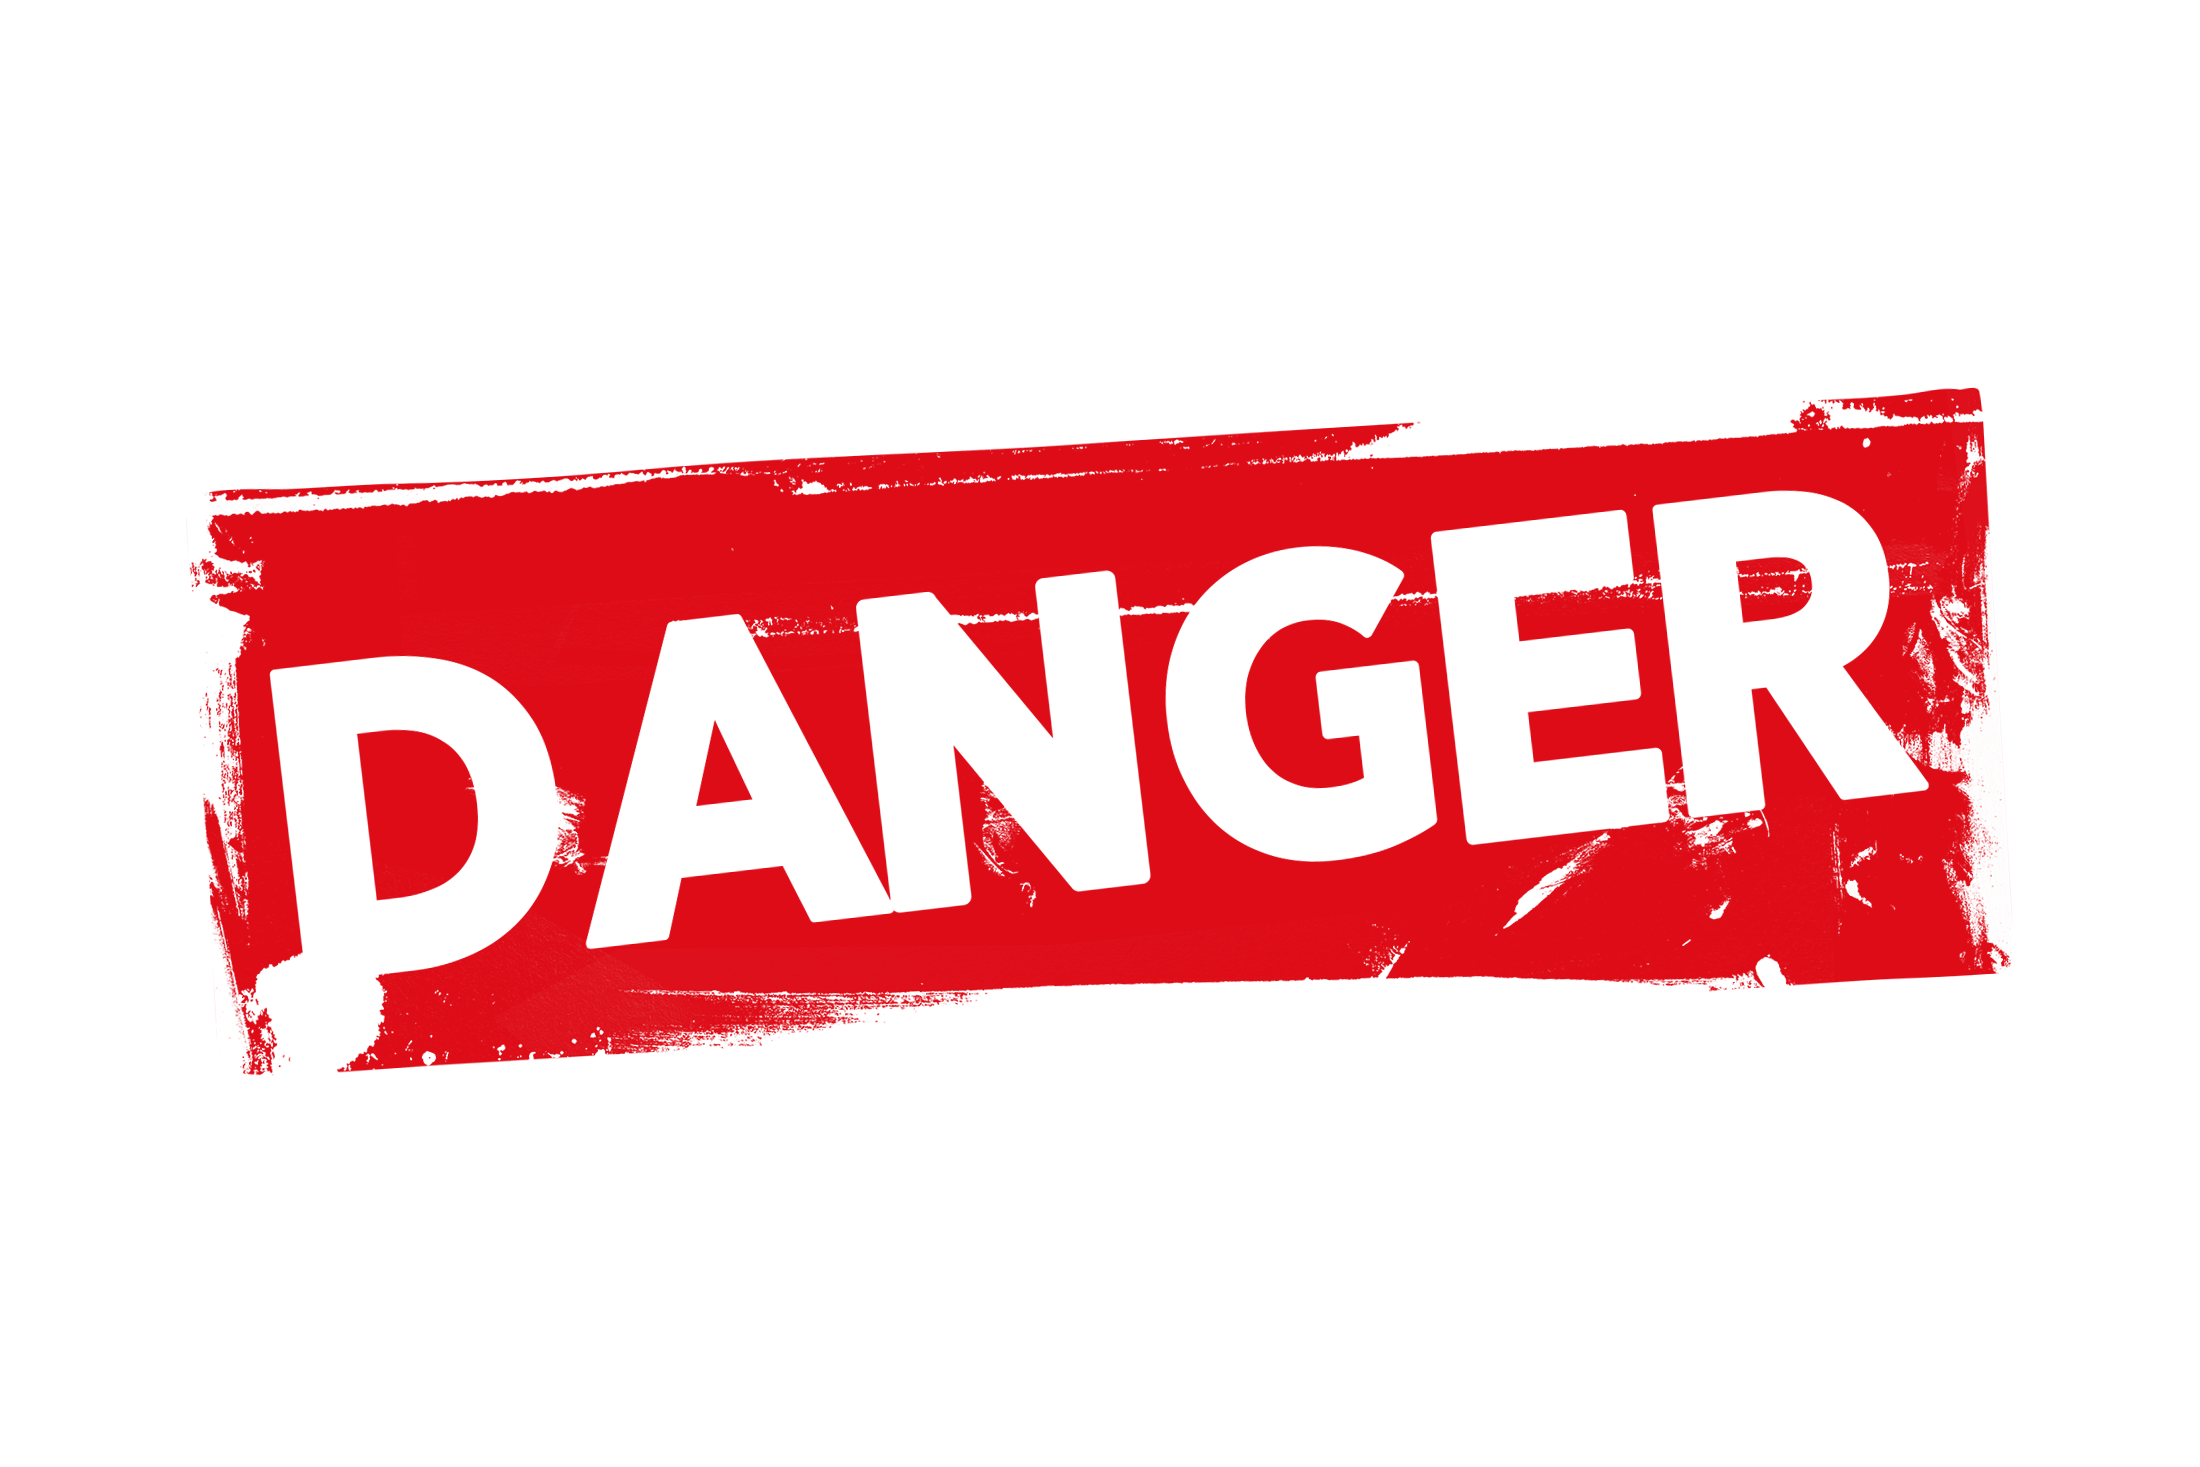 Grunge danger label PNG and PSD